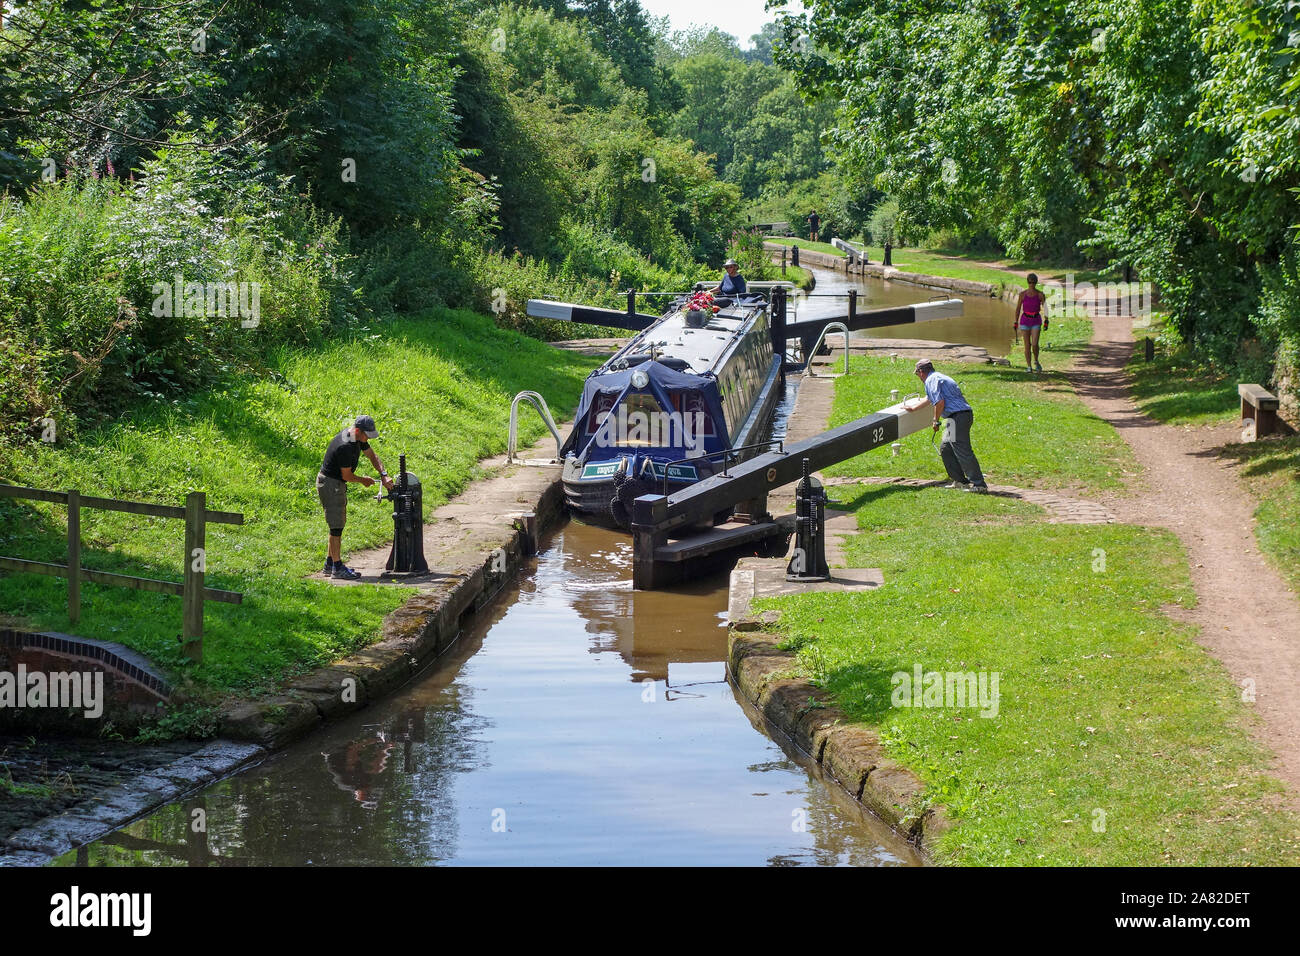 A canal boat or barge passing through Meaford House Lock on the Trent and Mersey canal at Meaford, near Stone, Staffordshire, England, UK Stock Photo